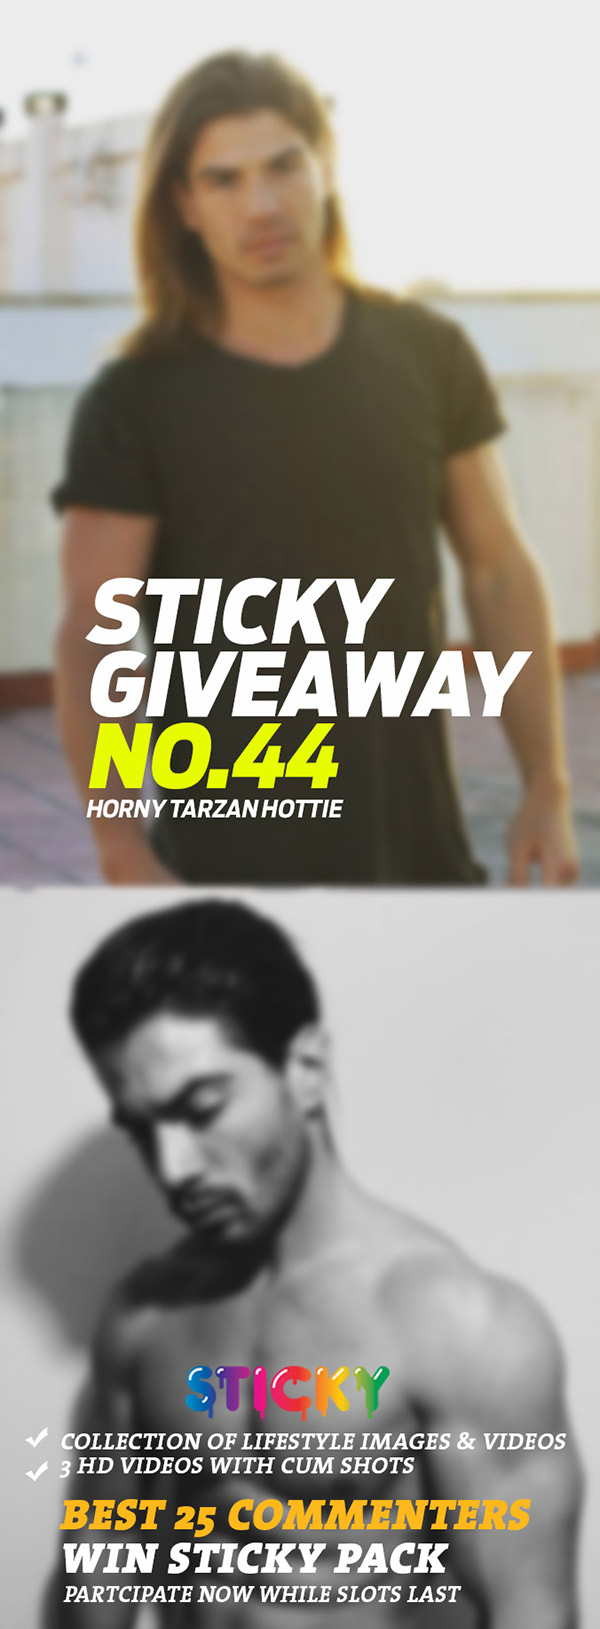 Sticky Giveaway 44